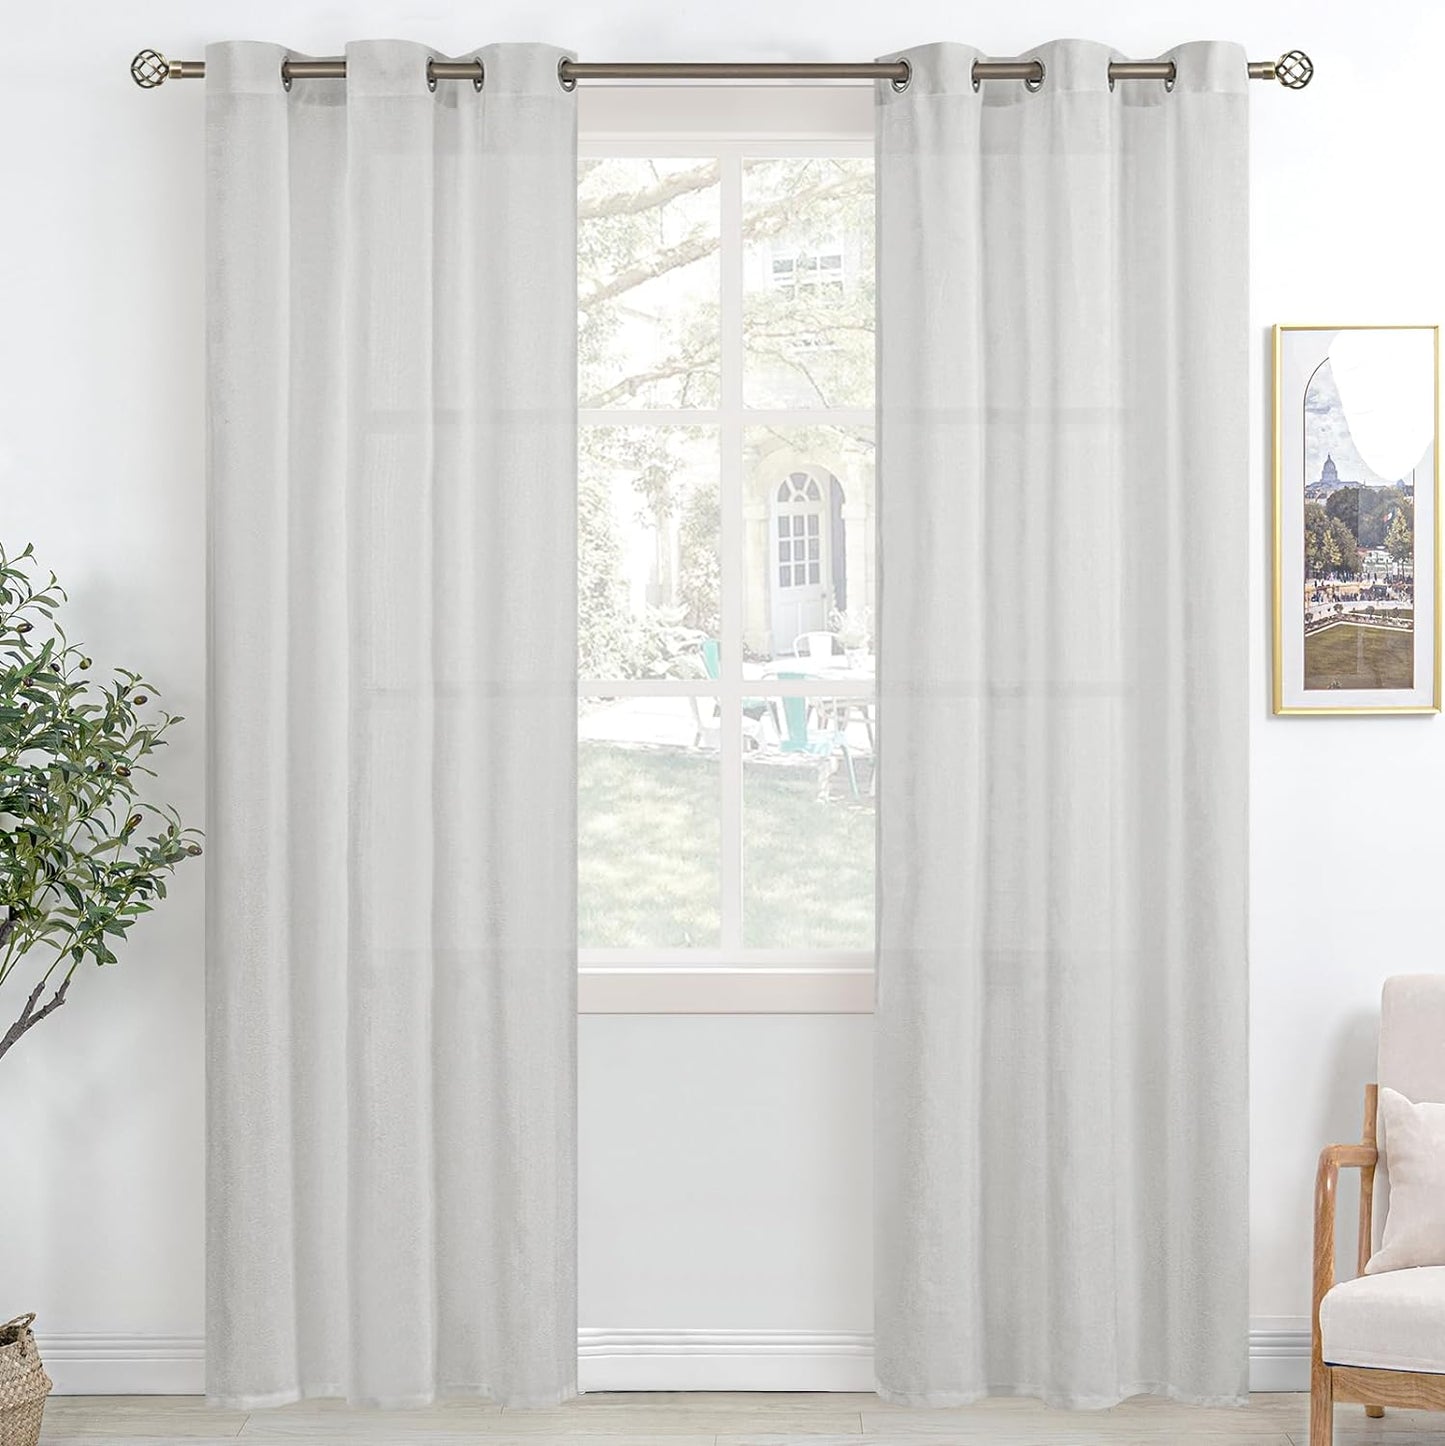 Bgment Natural Linen Look Semi Sheer Curtains for Bedroom, 52 X 54 Inch White Grommet Light Filtering Casual Textured Privacy Curtains for Bay Window, 2 Panels  BGment Light Grey 42W X 84L 